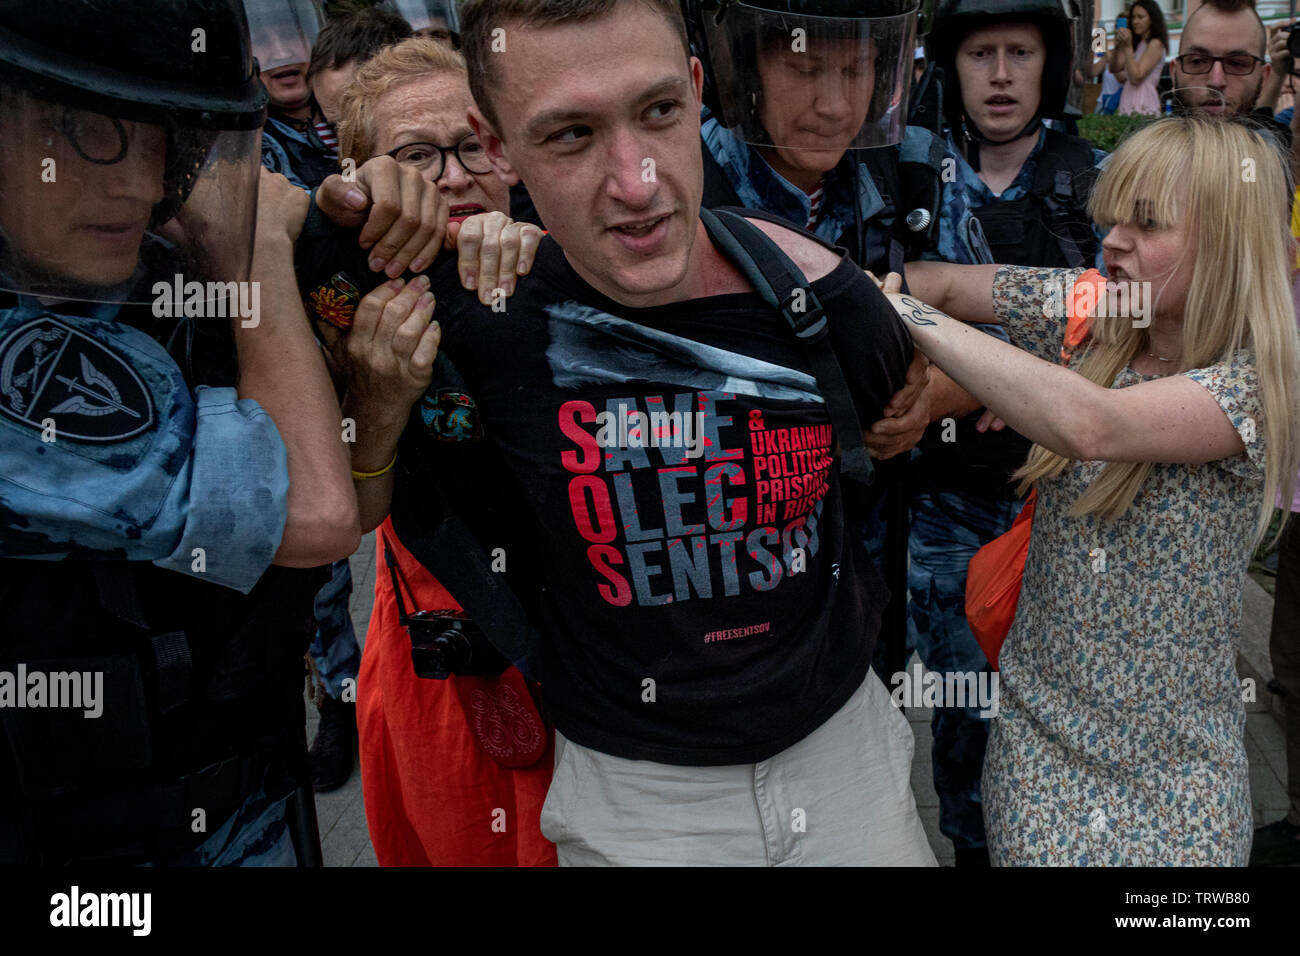 Moscow, Russia. 12th June, 2019 Police officers detain opposition activist Konstantin Kotov during a rally in support of Russian journalist Ivan Golunov who was earlier released from custody in Moscow, Russia. Golunov, who works for the online news portal Meduza, was detained on 6th June 2019 in central Moscow on suspicion of drug dealing Stock Photo